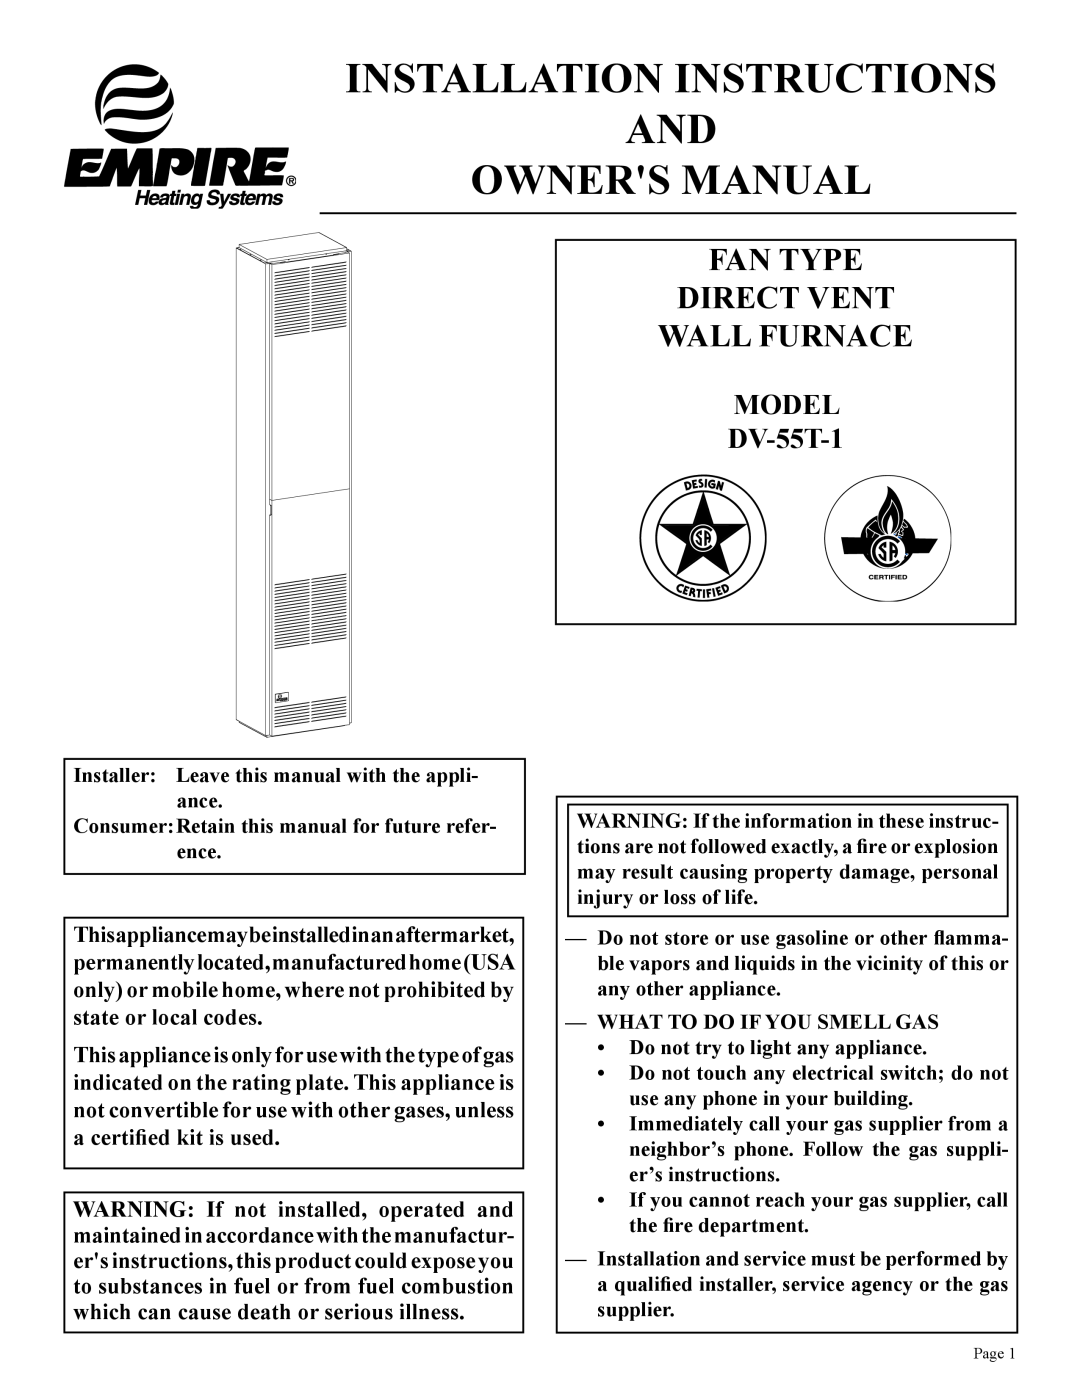 Empire Comfort Systems installation instructions Fan Type Direct Vent Wall Furnace, MODEL DV-55T-1 